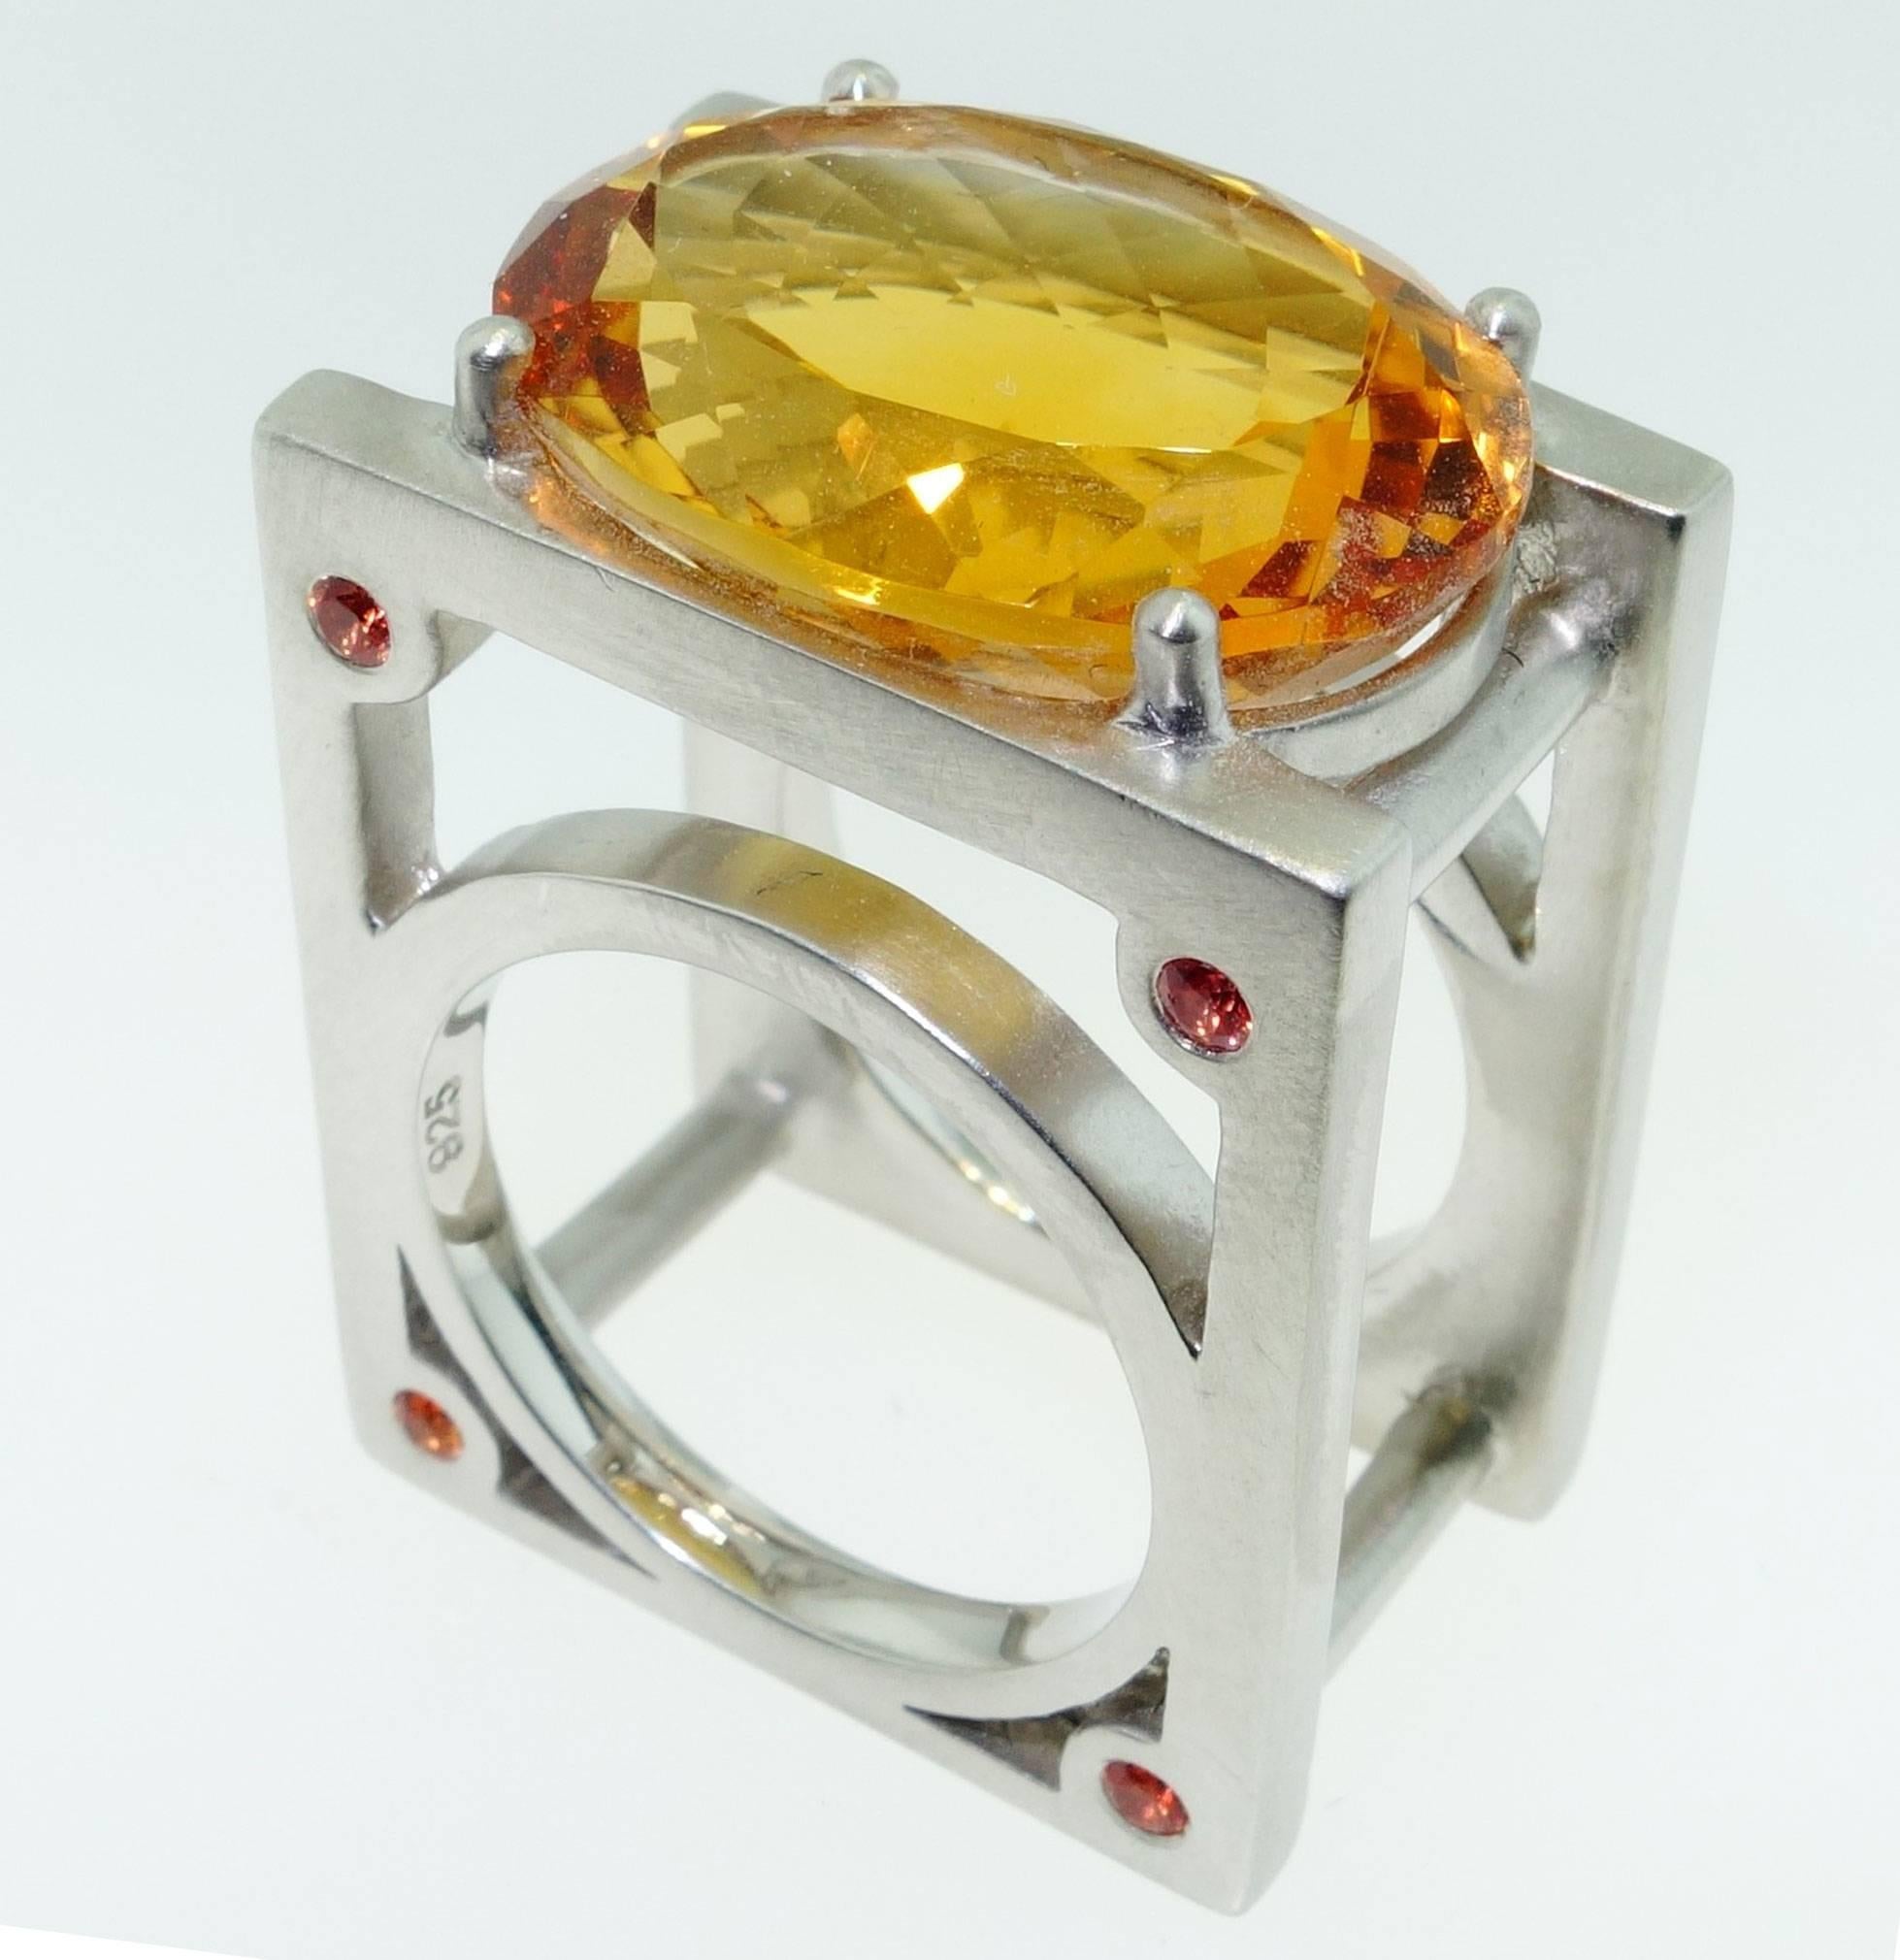 Simply Beautiful! Sensational Citrine and Sapphire Sterling Silver Statement Ring. Centering a Hand set  large 18 Carat Oval facet-cut Citrine and 8 'rivets' set with small Orange Sapphires, in a unique Hand crafted Industrial style Sterling Silver